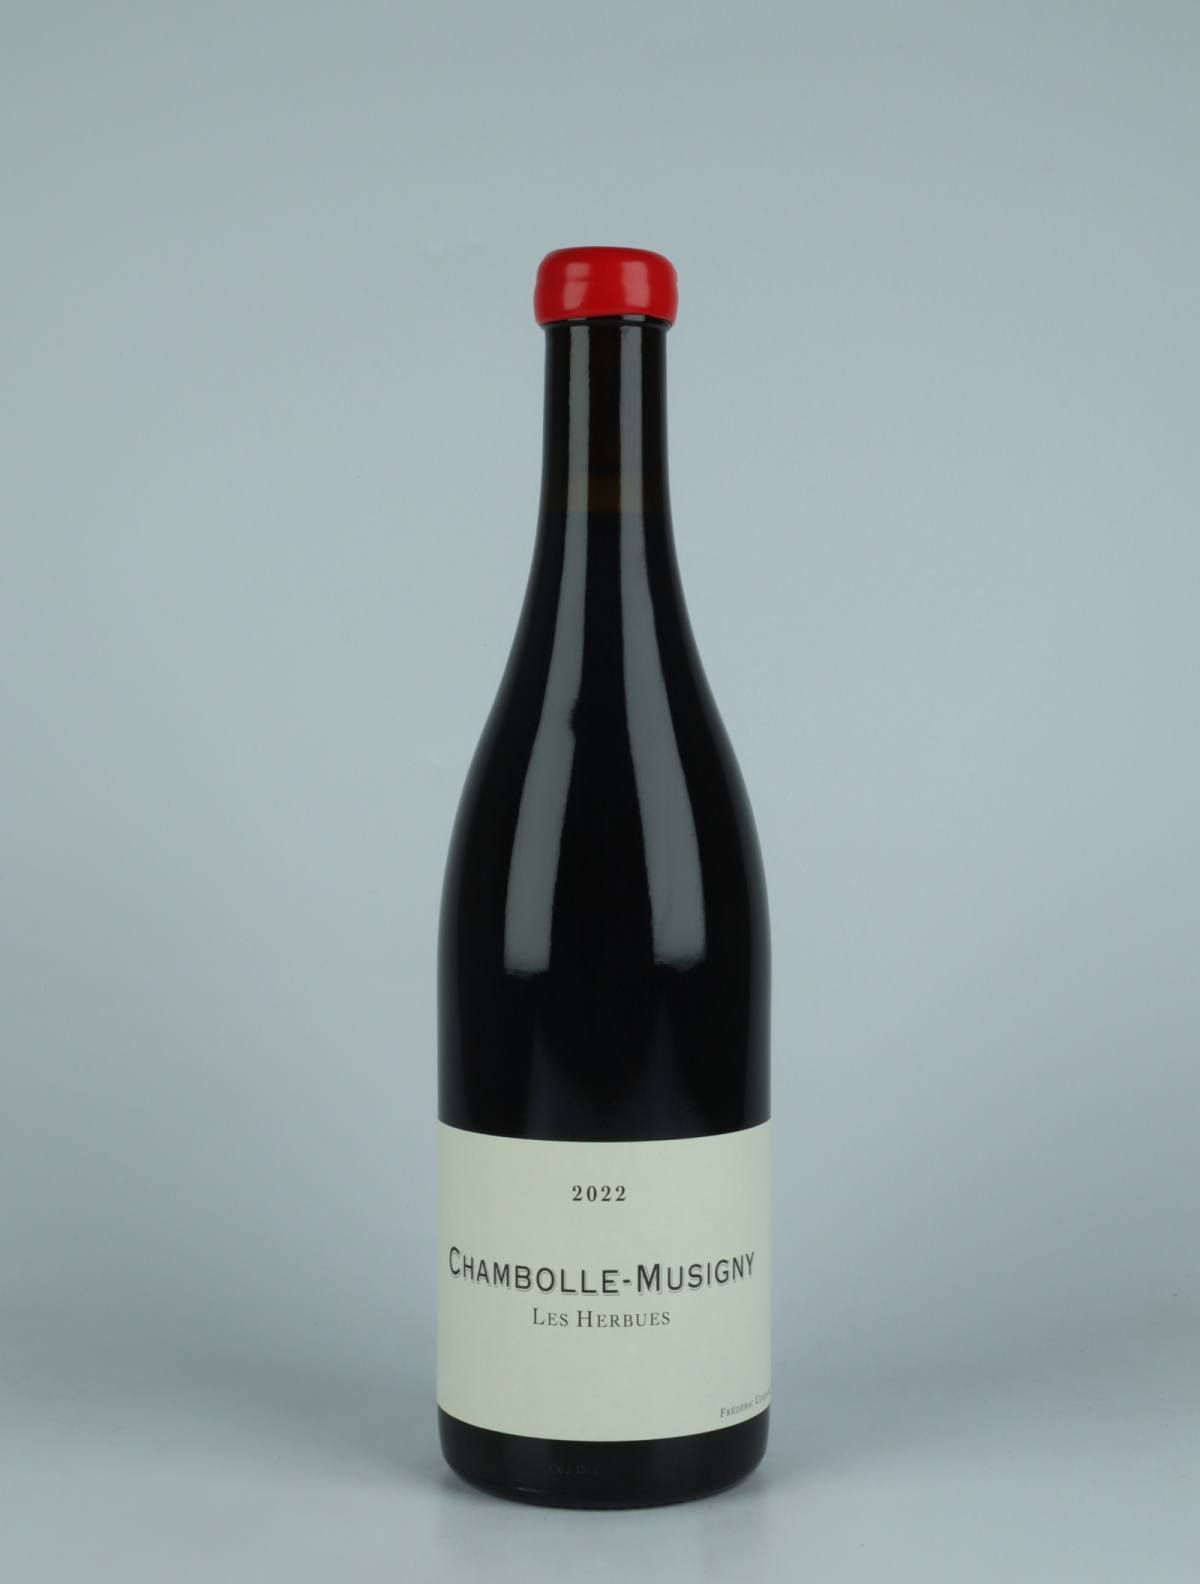 A bottle 2022 Chambolle Musigny - Les Herbues Red wine from Frédéric Cossard, Burgundy in France